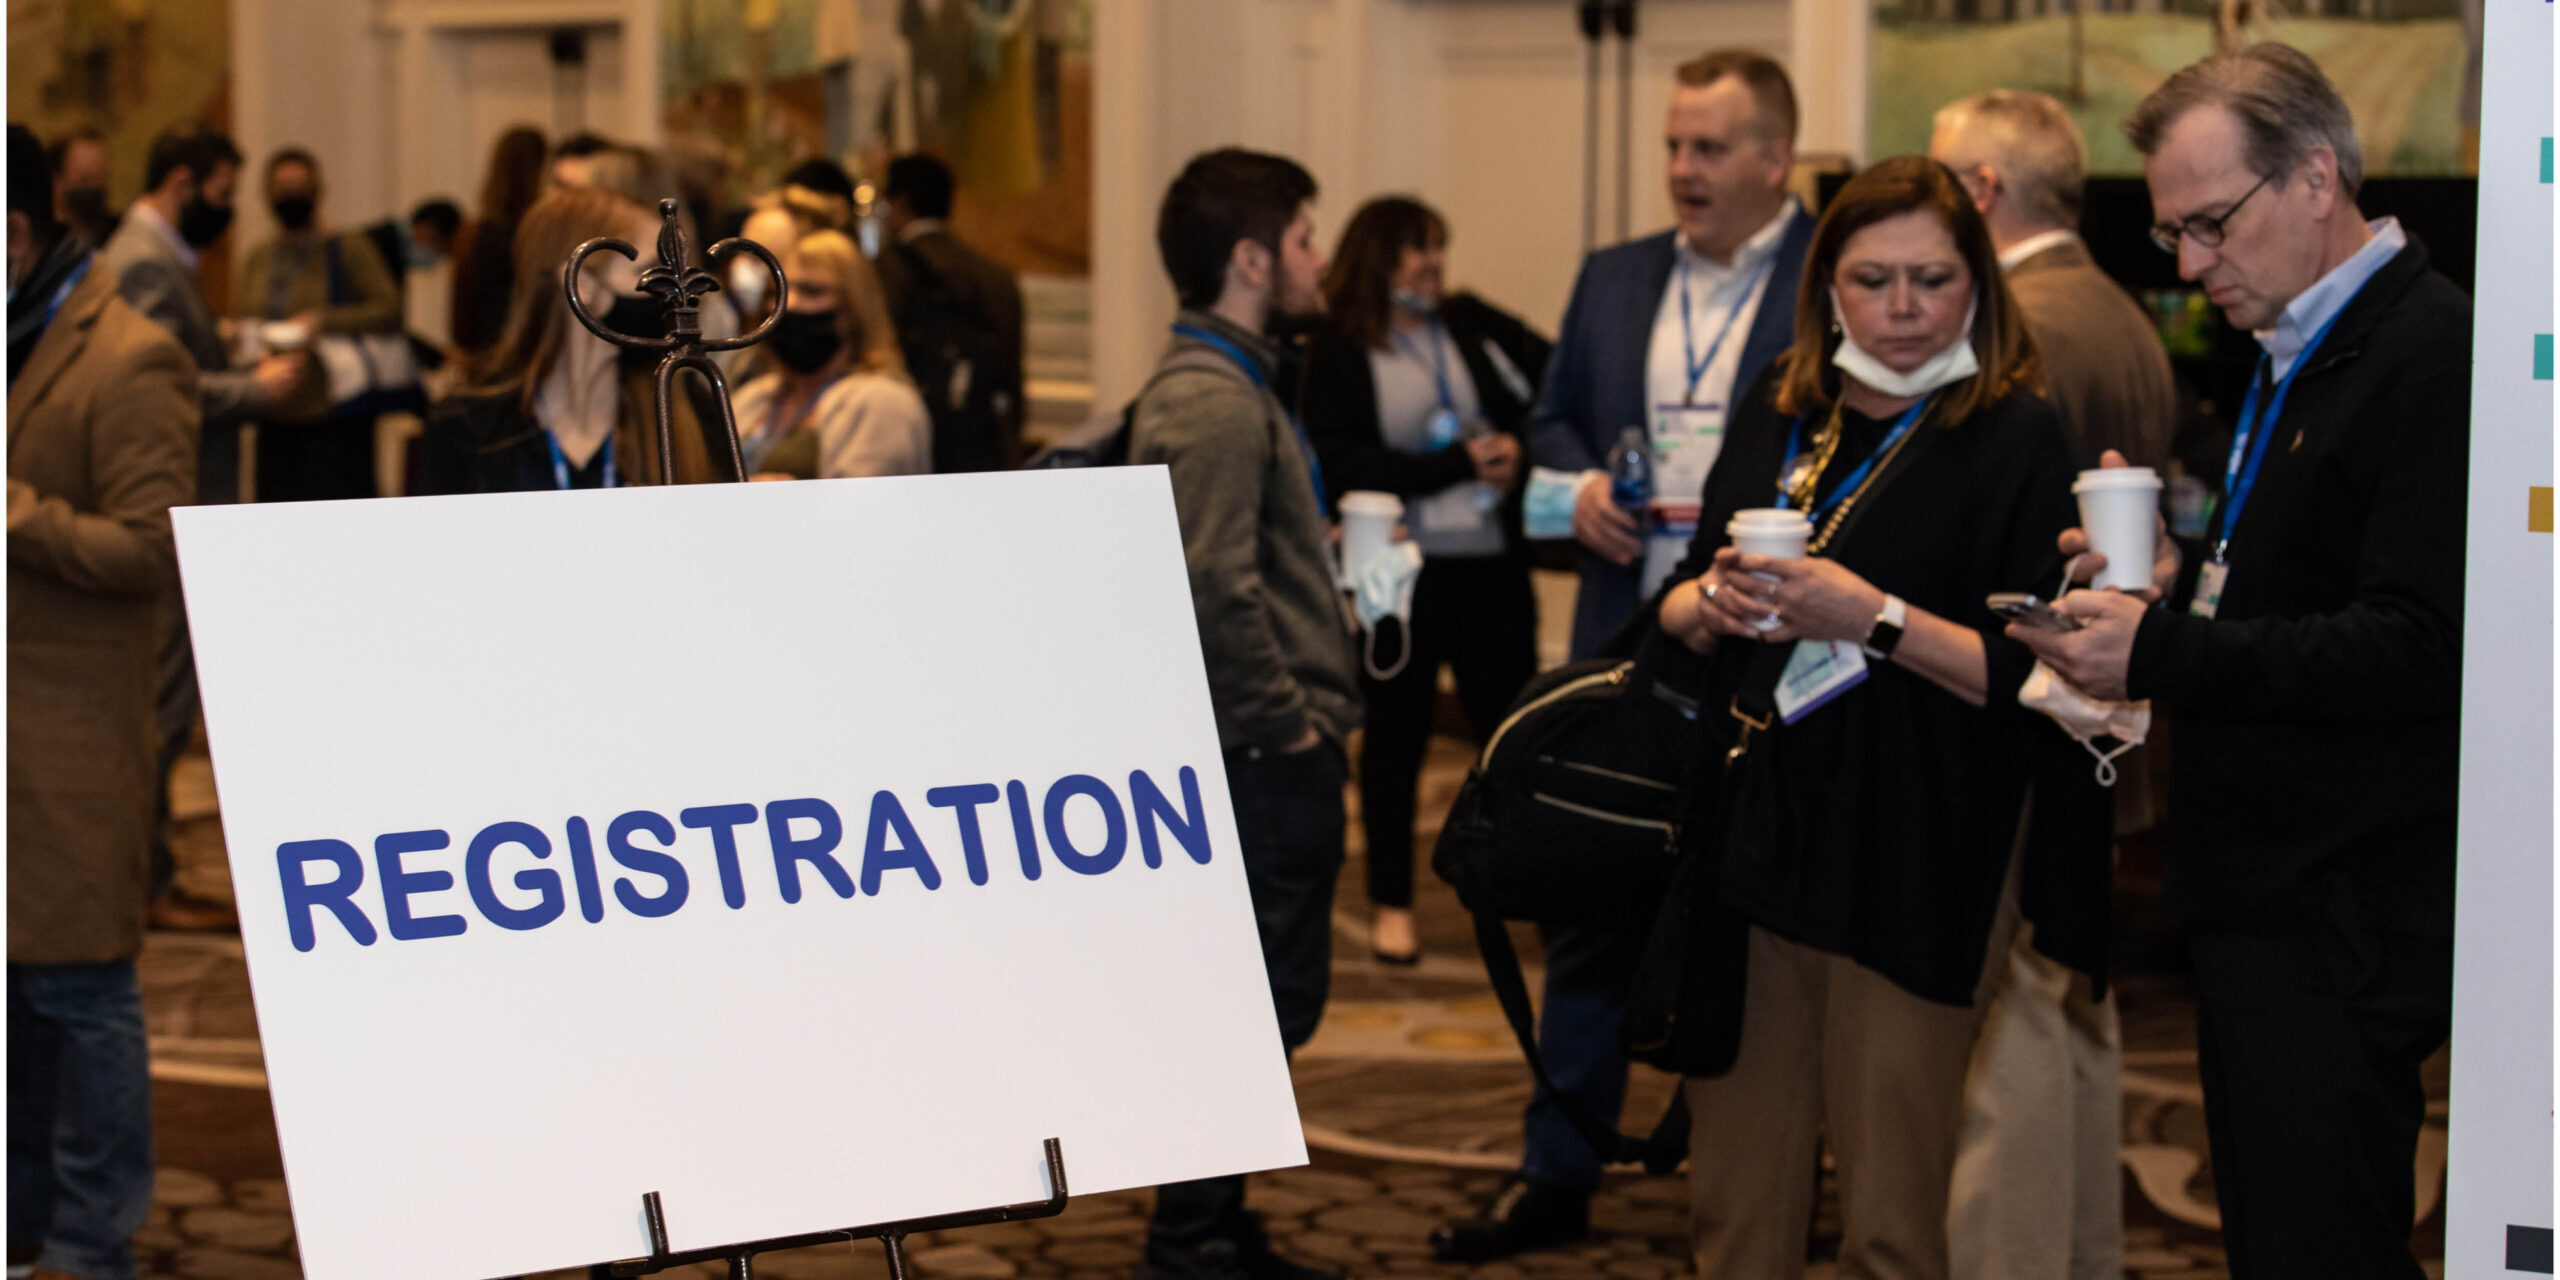 Registration sign for MDA conference in lobby room filled with people